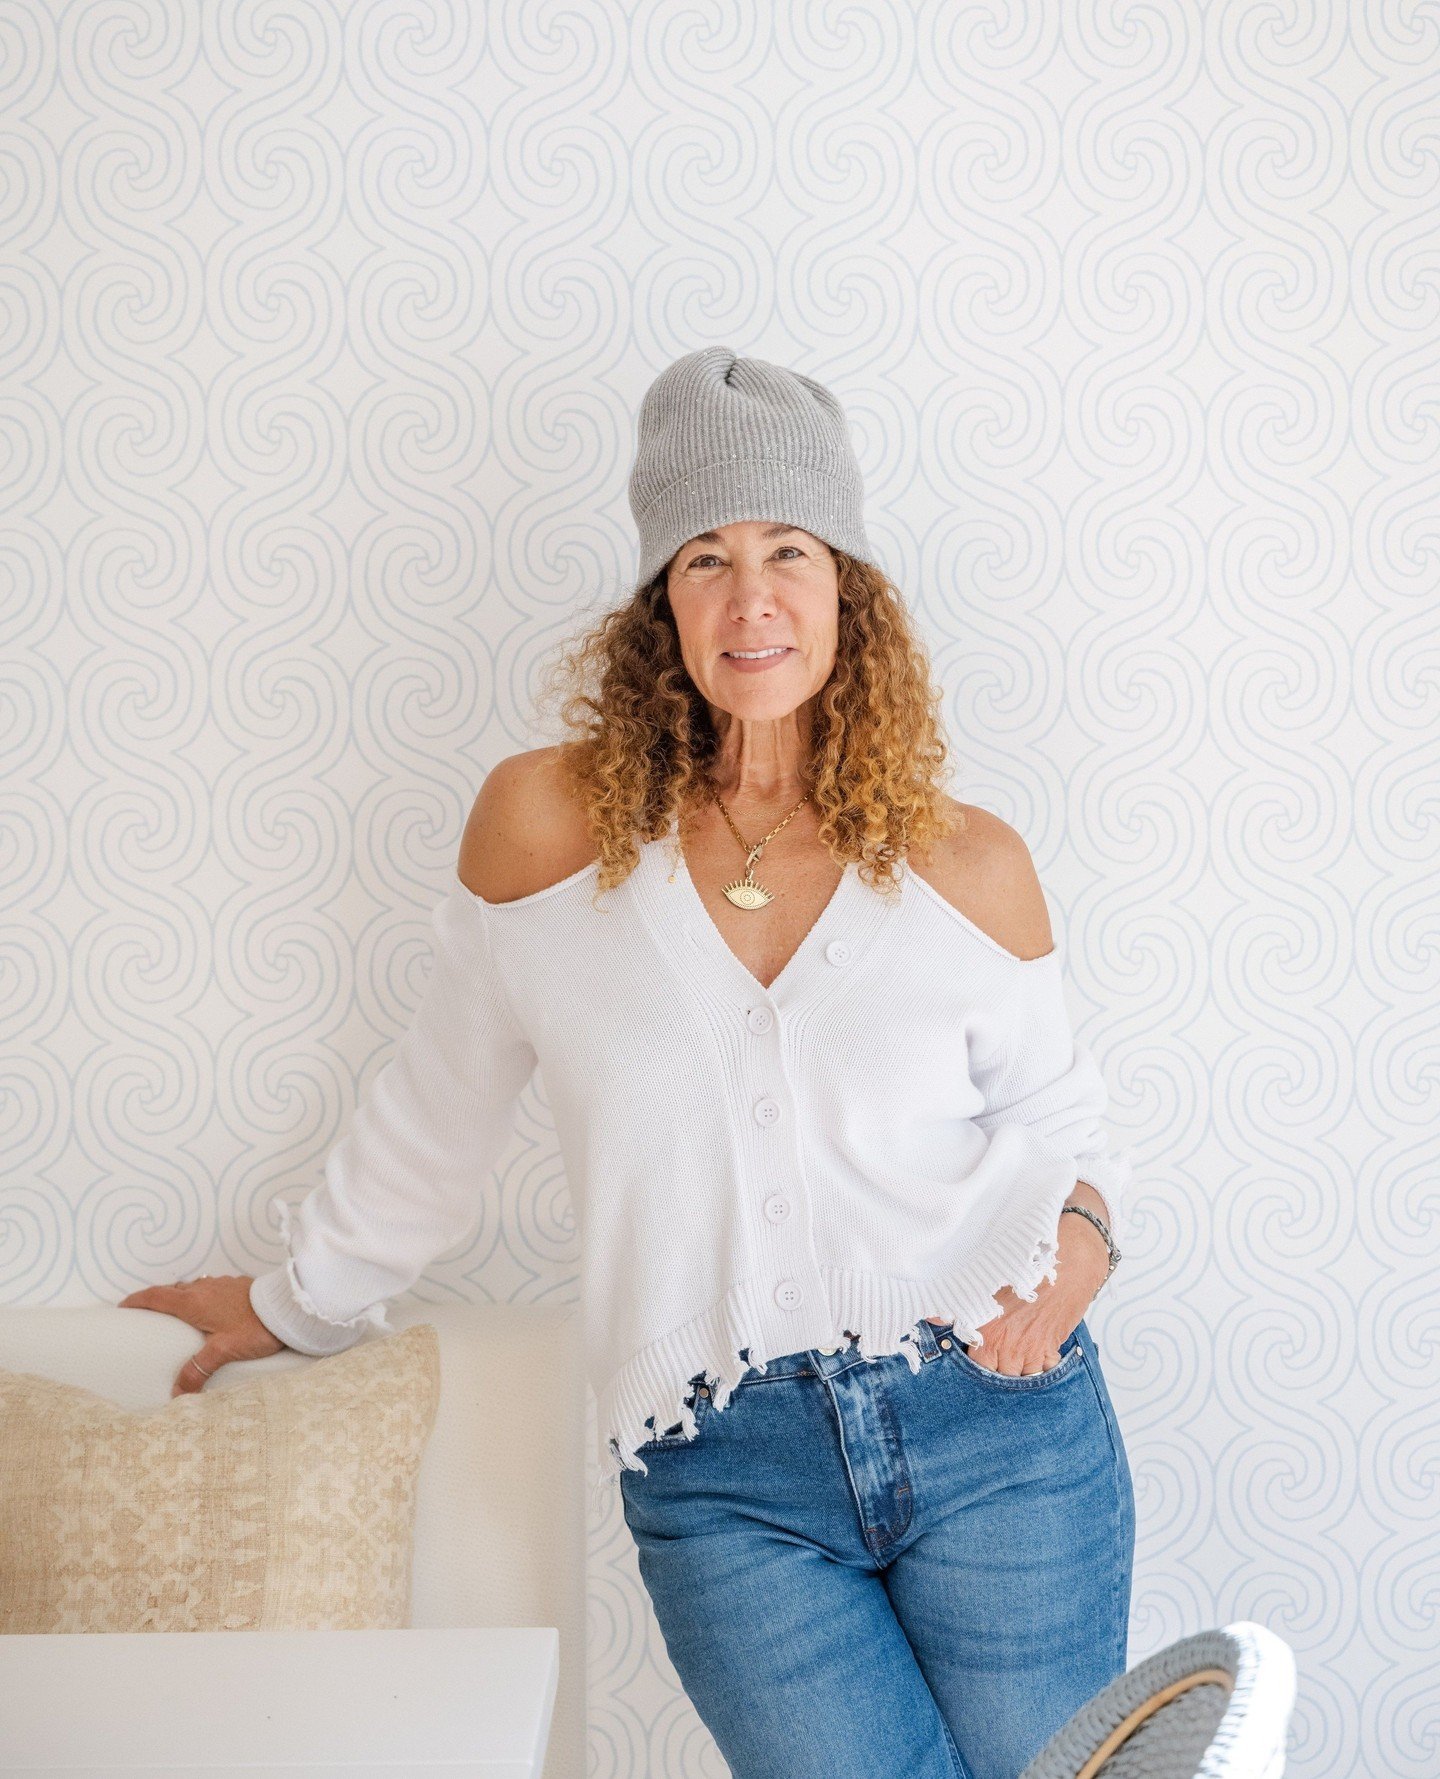 Hi, I'm Jodi 👋🏼 I've been sprinkling my design magic throughout Santa Barbara for over 20 incredible years. From the moment I put down roots here, creating stylish spaces has been my passion. From renovating entire homes to adding the perfect finis